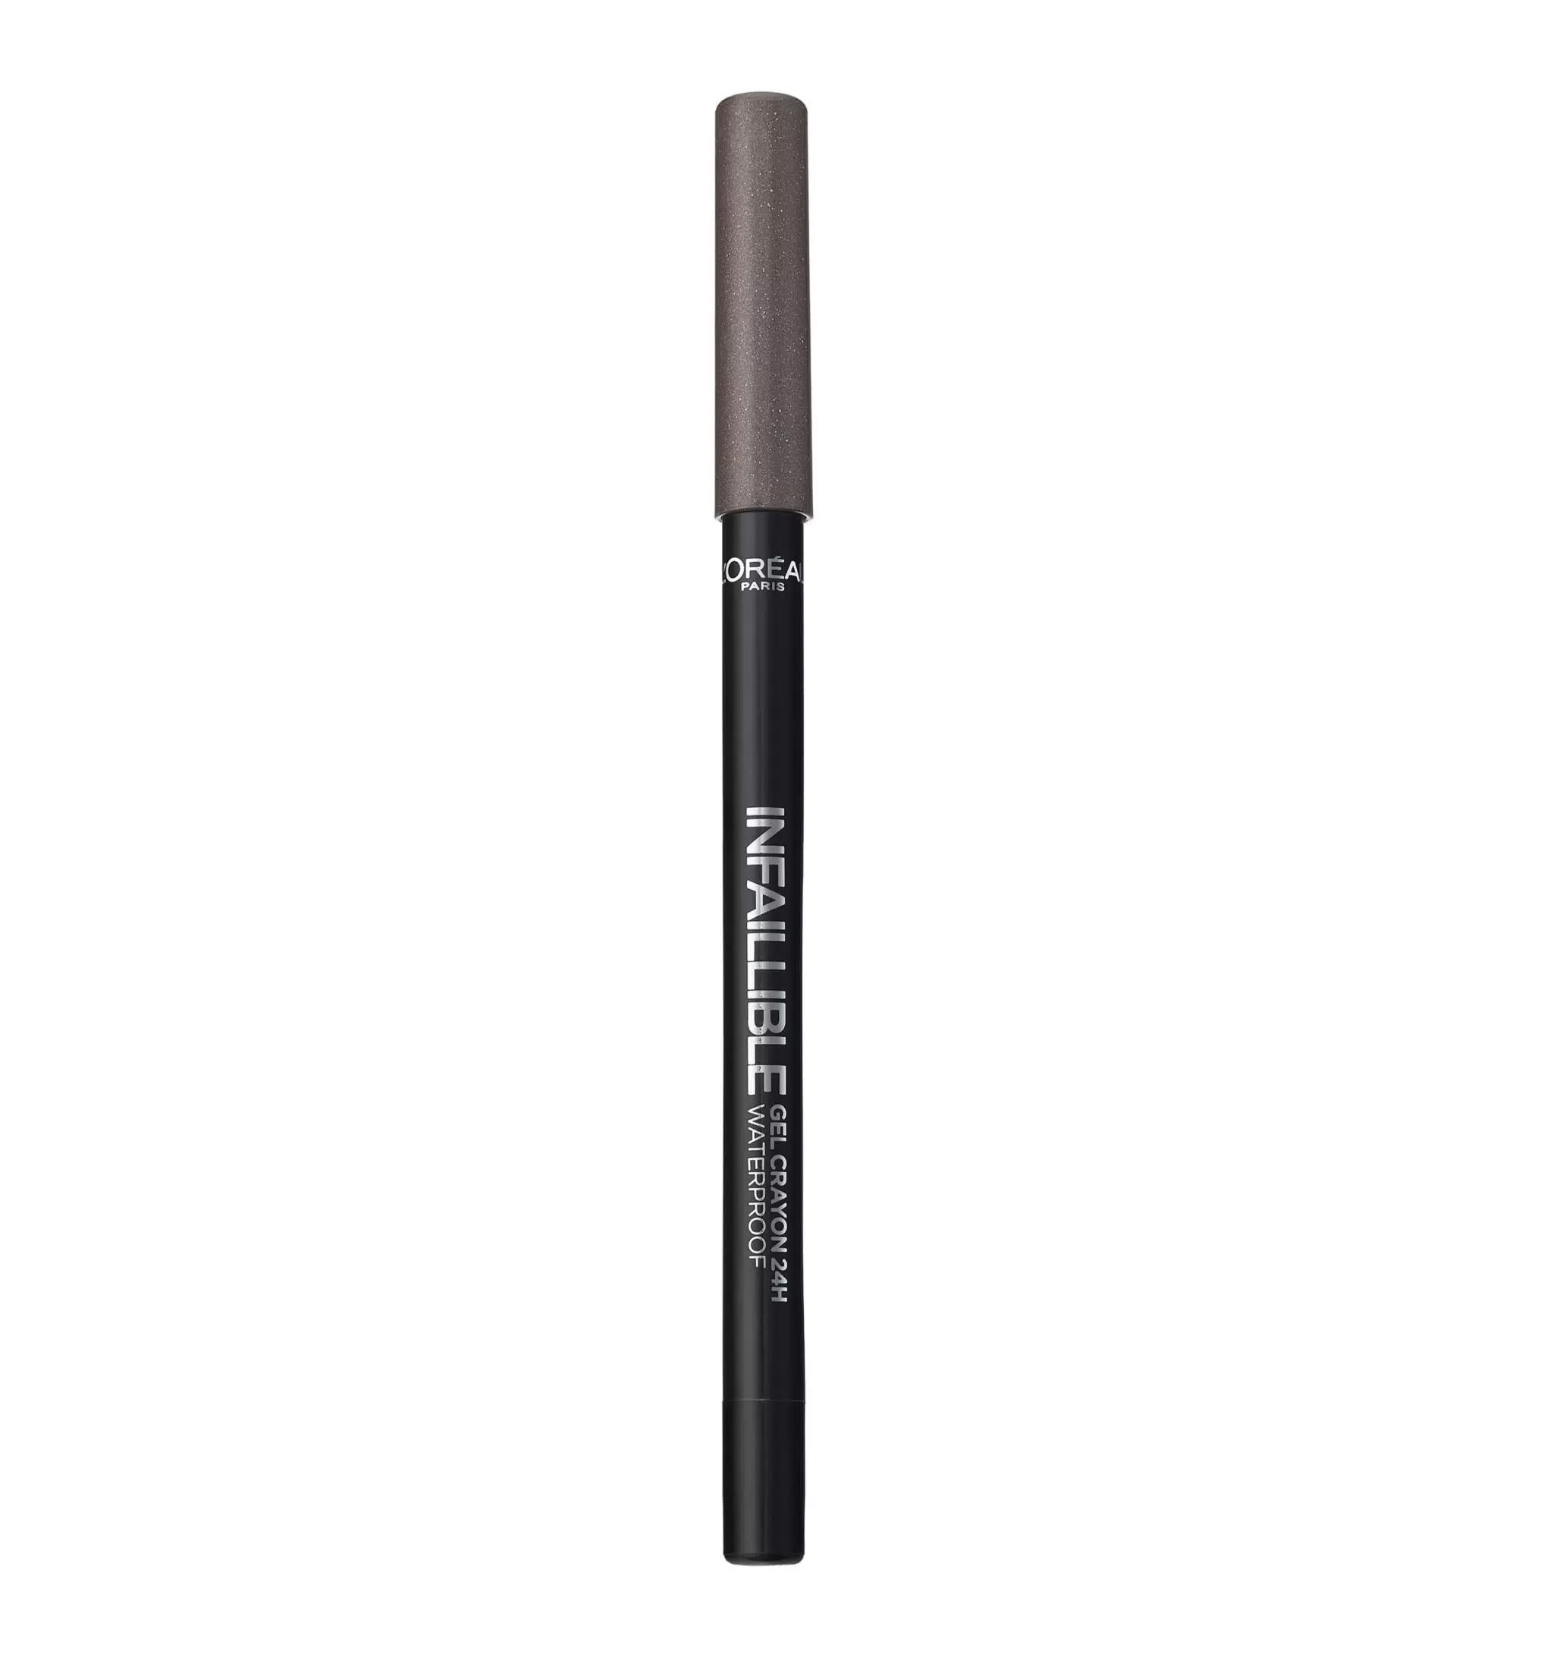    / L'Oreal Paris -    Infaillible Gel Crayon 004 Taupe Of The World